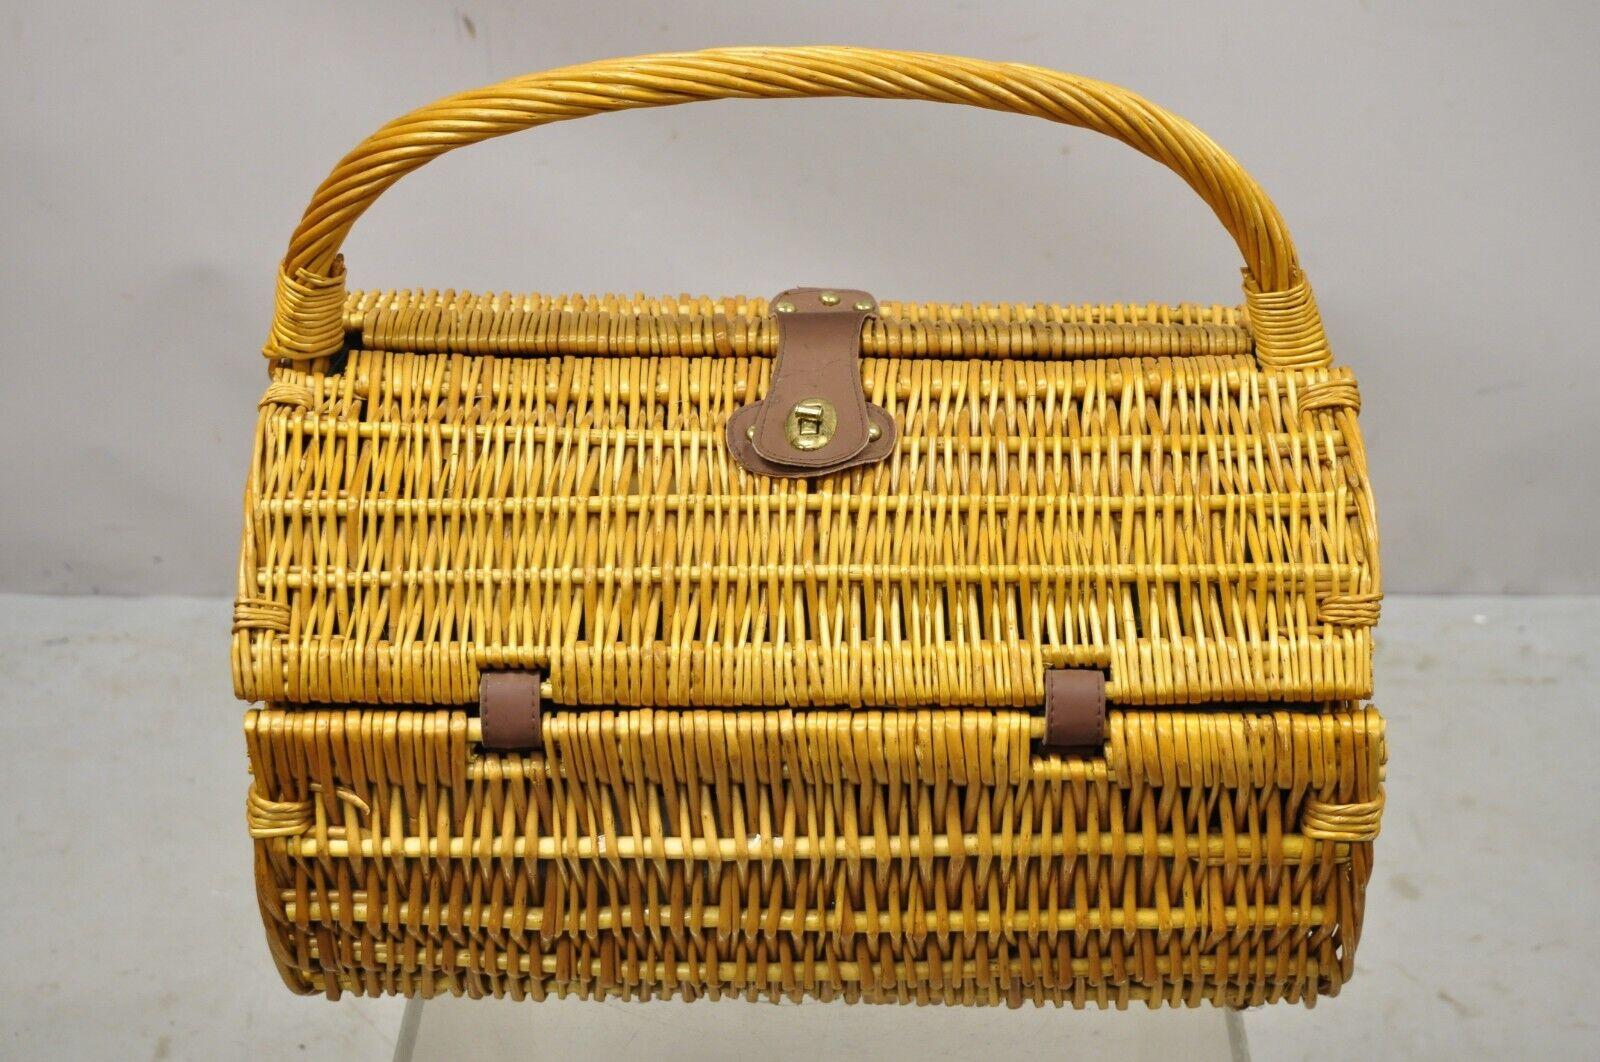 Vintage style Cylinder Deluxe wicker Picnic basket - Svc for 2, circa late 20th century. Measurements: 18